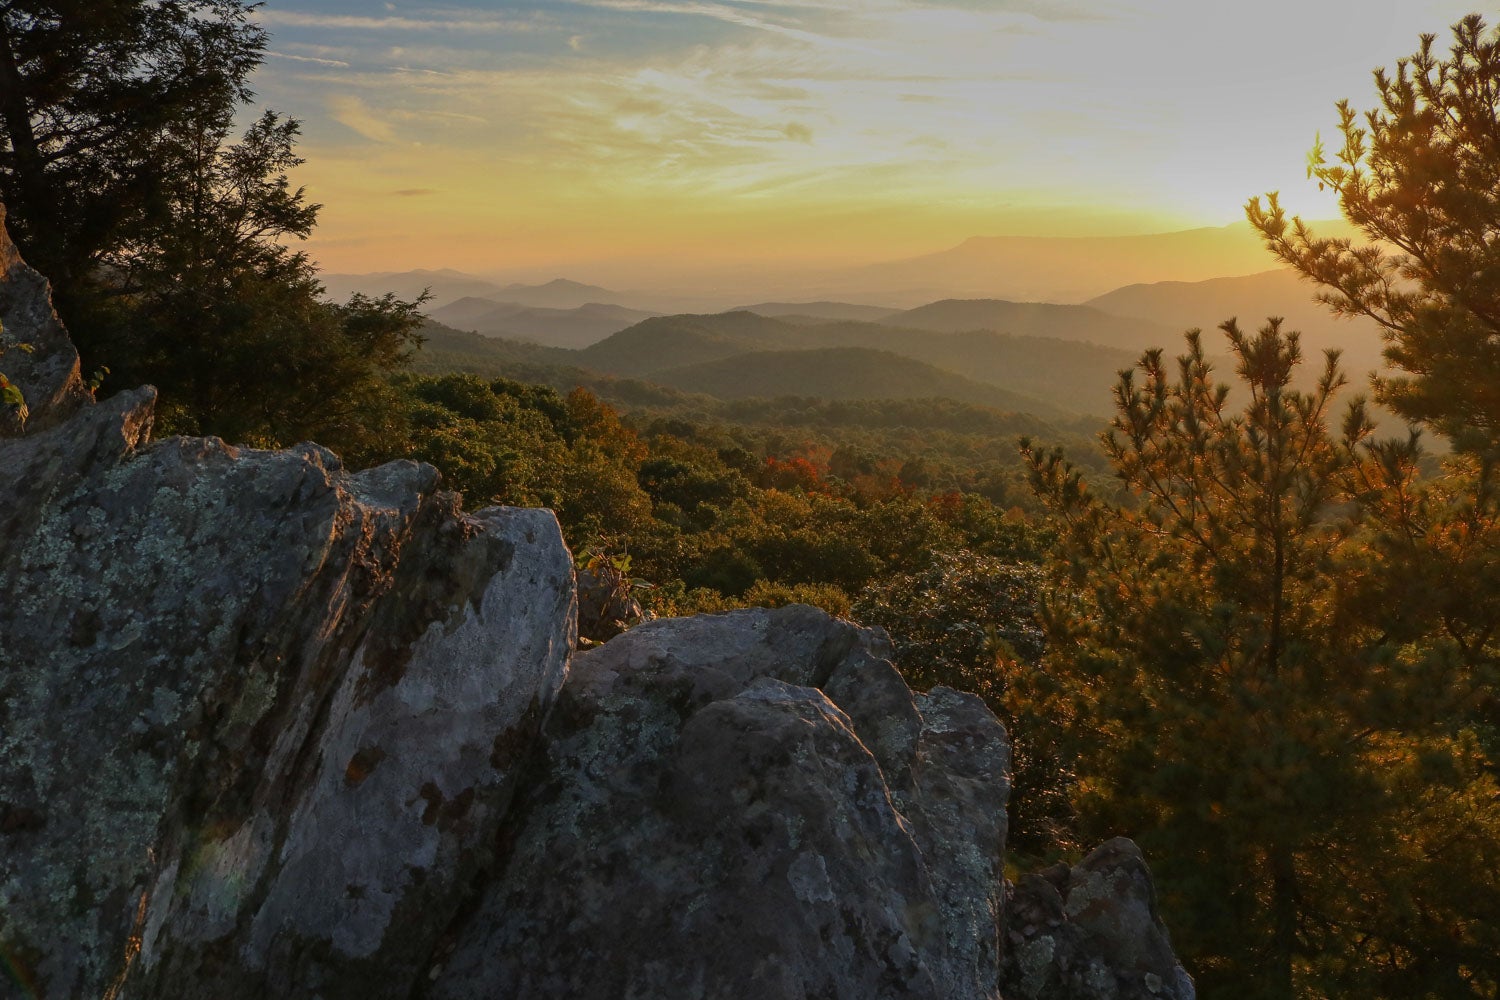 rocks and trees frame layered hill at sunset from The Point Overlook in shenandoah national park